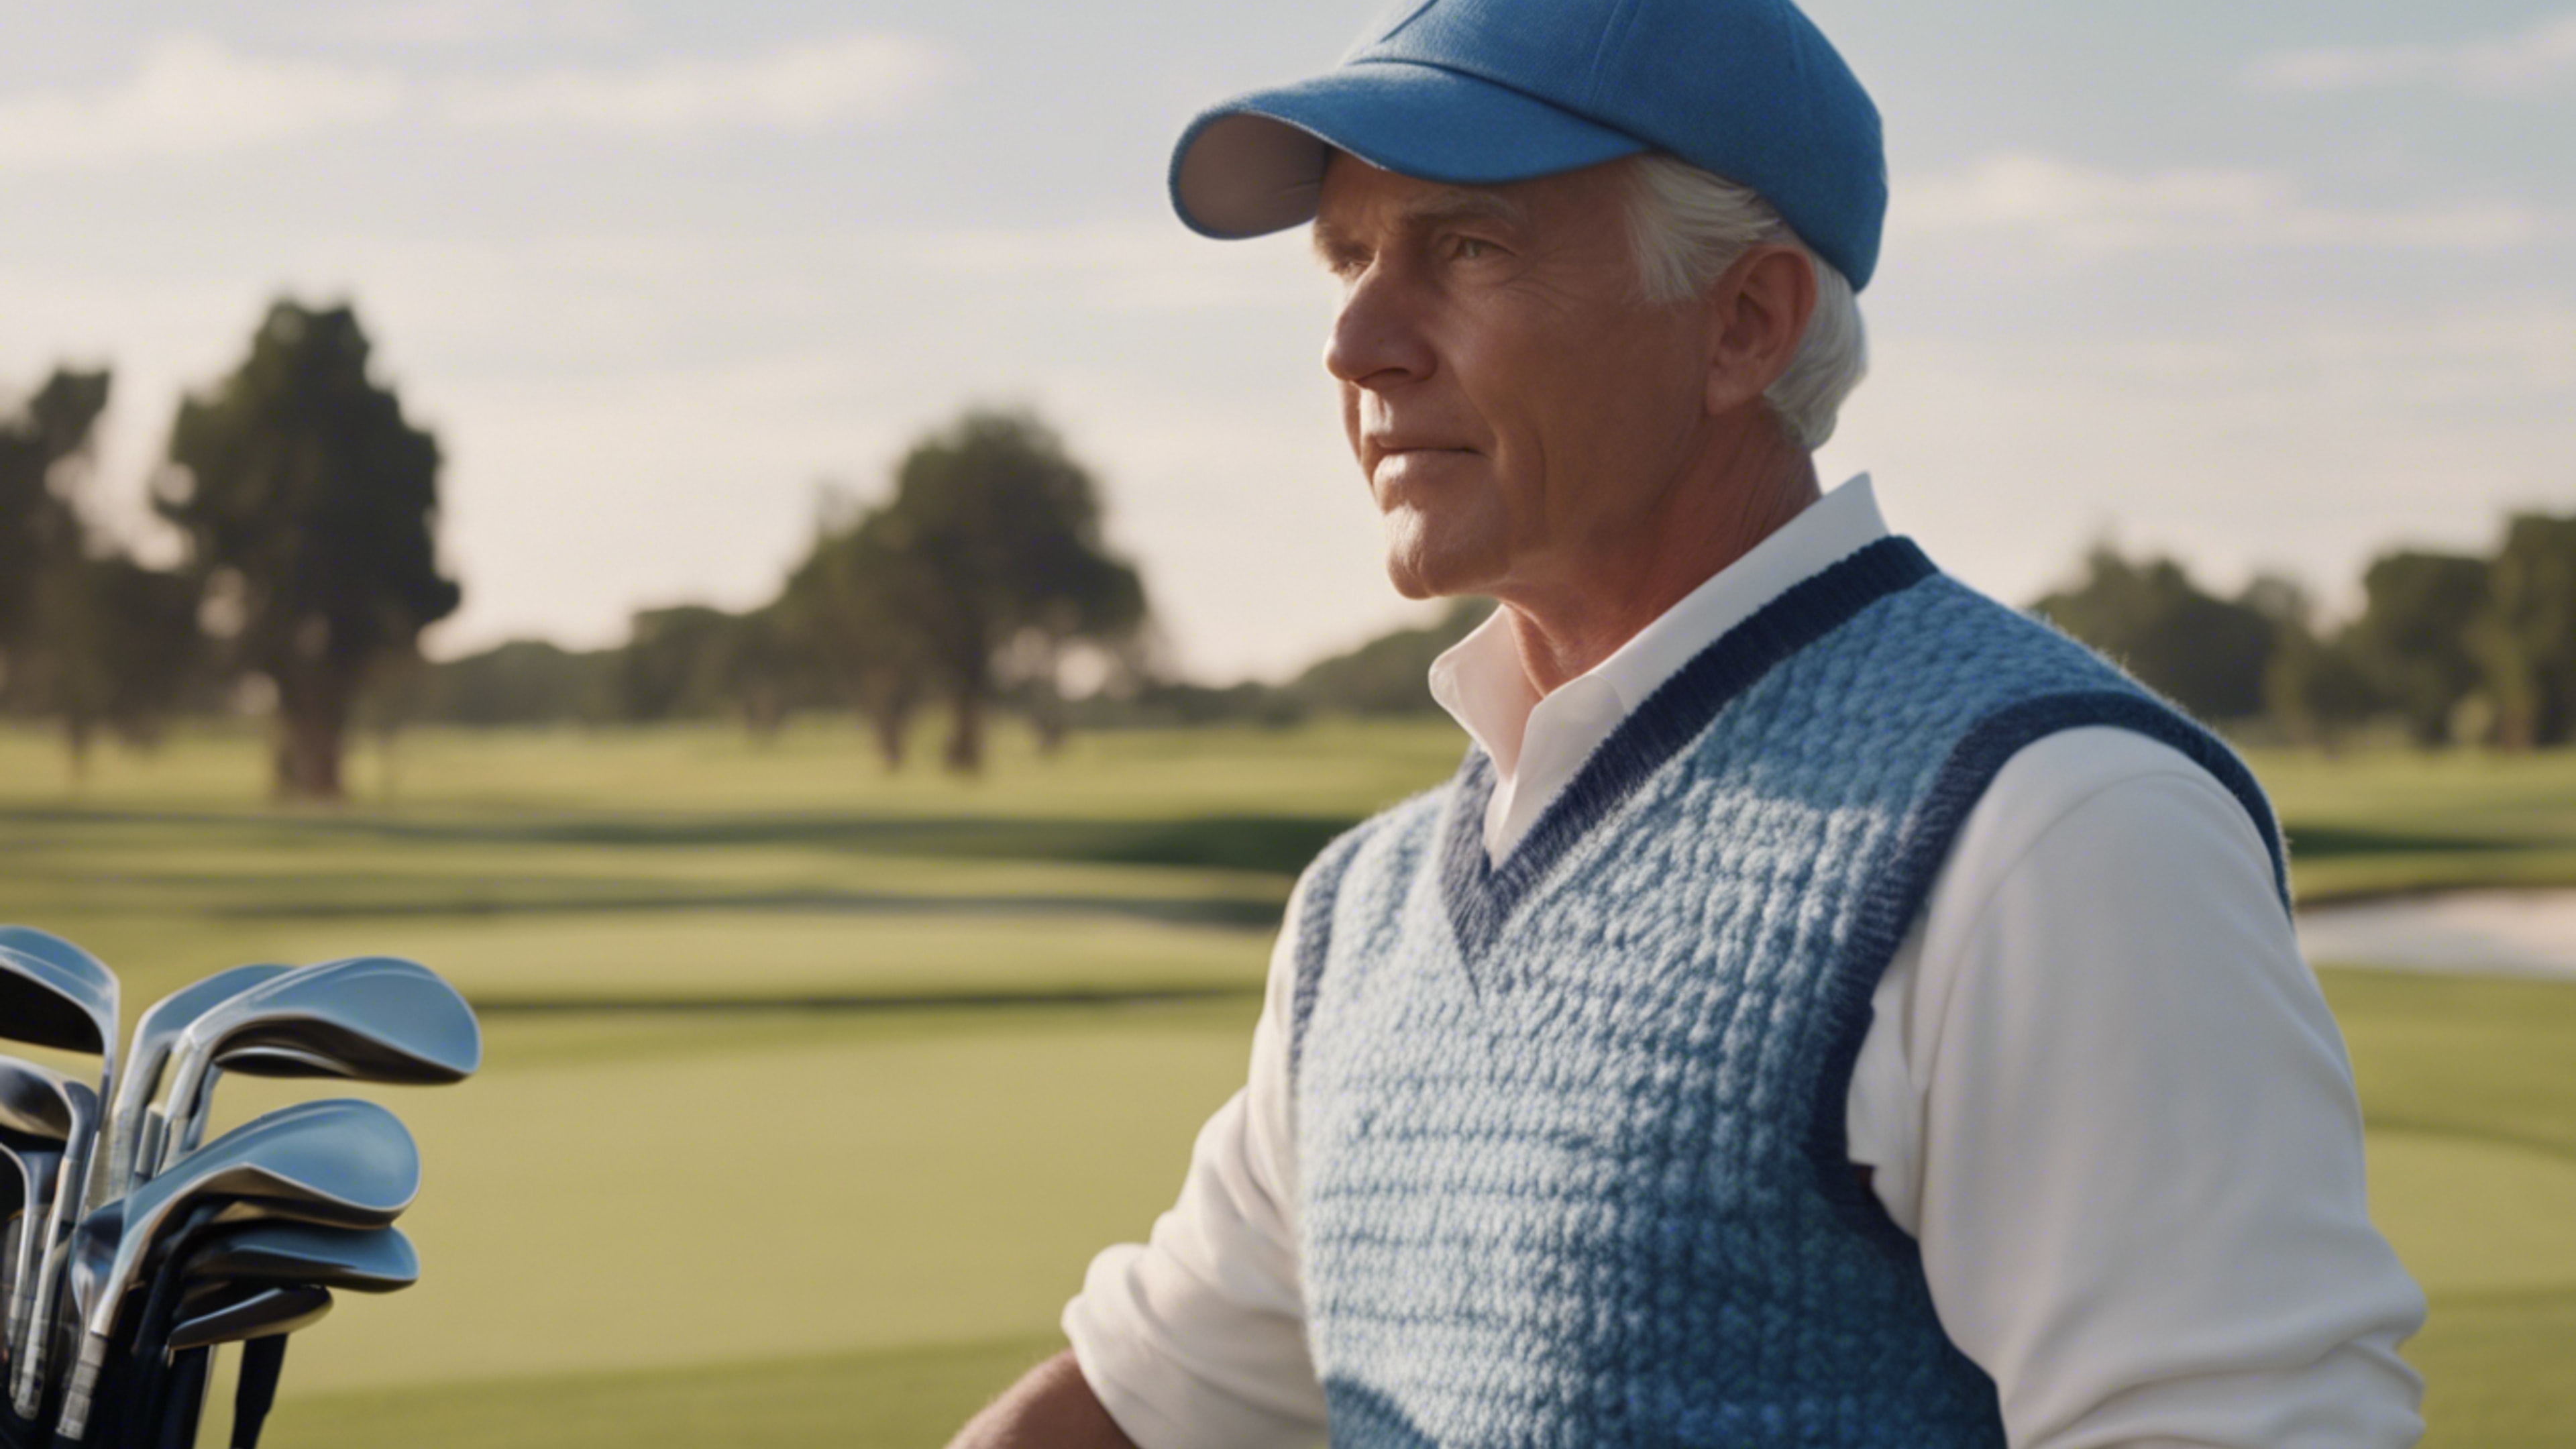 A preppy gentleman playing golf, wearing a crisp blue sweater vest, white trousers, and a blue plaid golf cap. Валлпапер[e529d0abba9b41109f82]